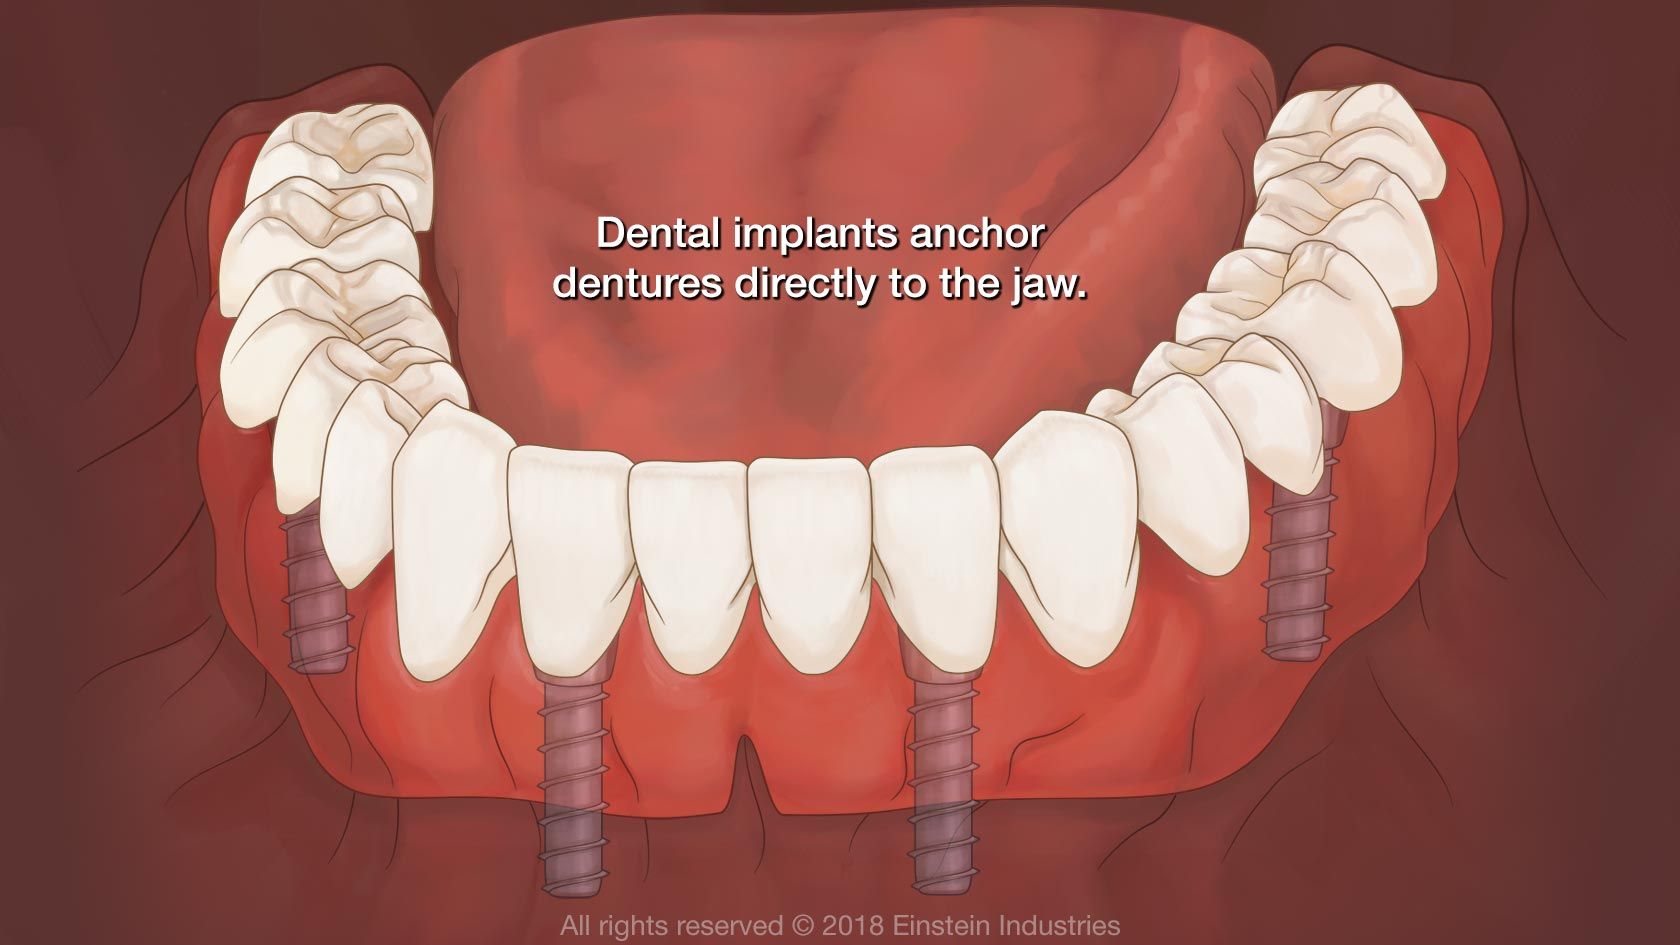 Dental implants anchor dentures directly to the jaw